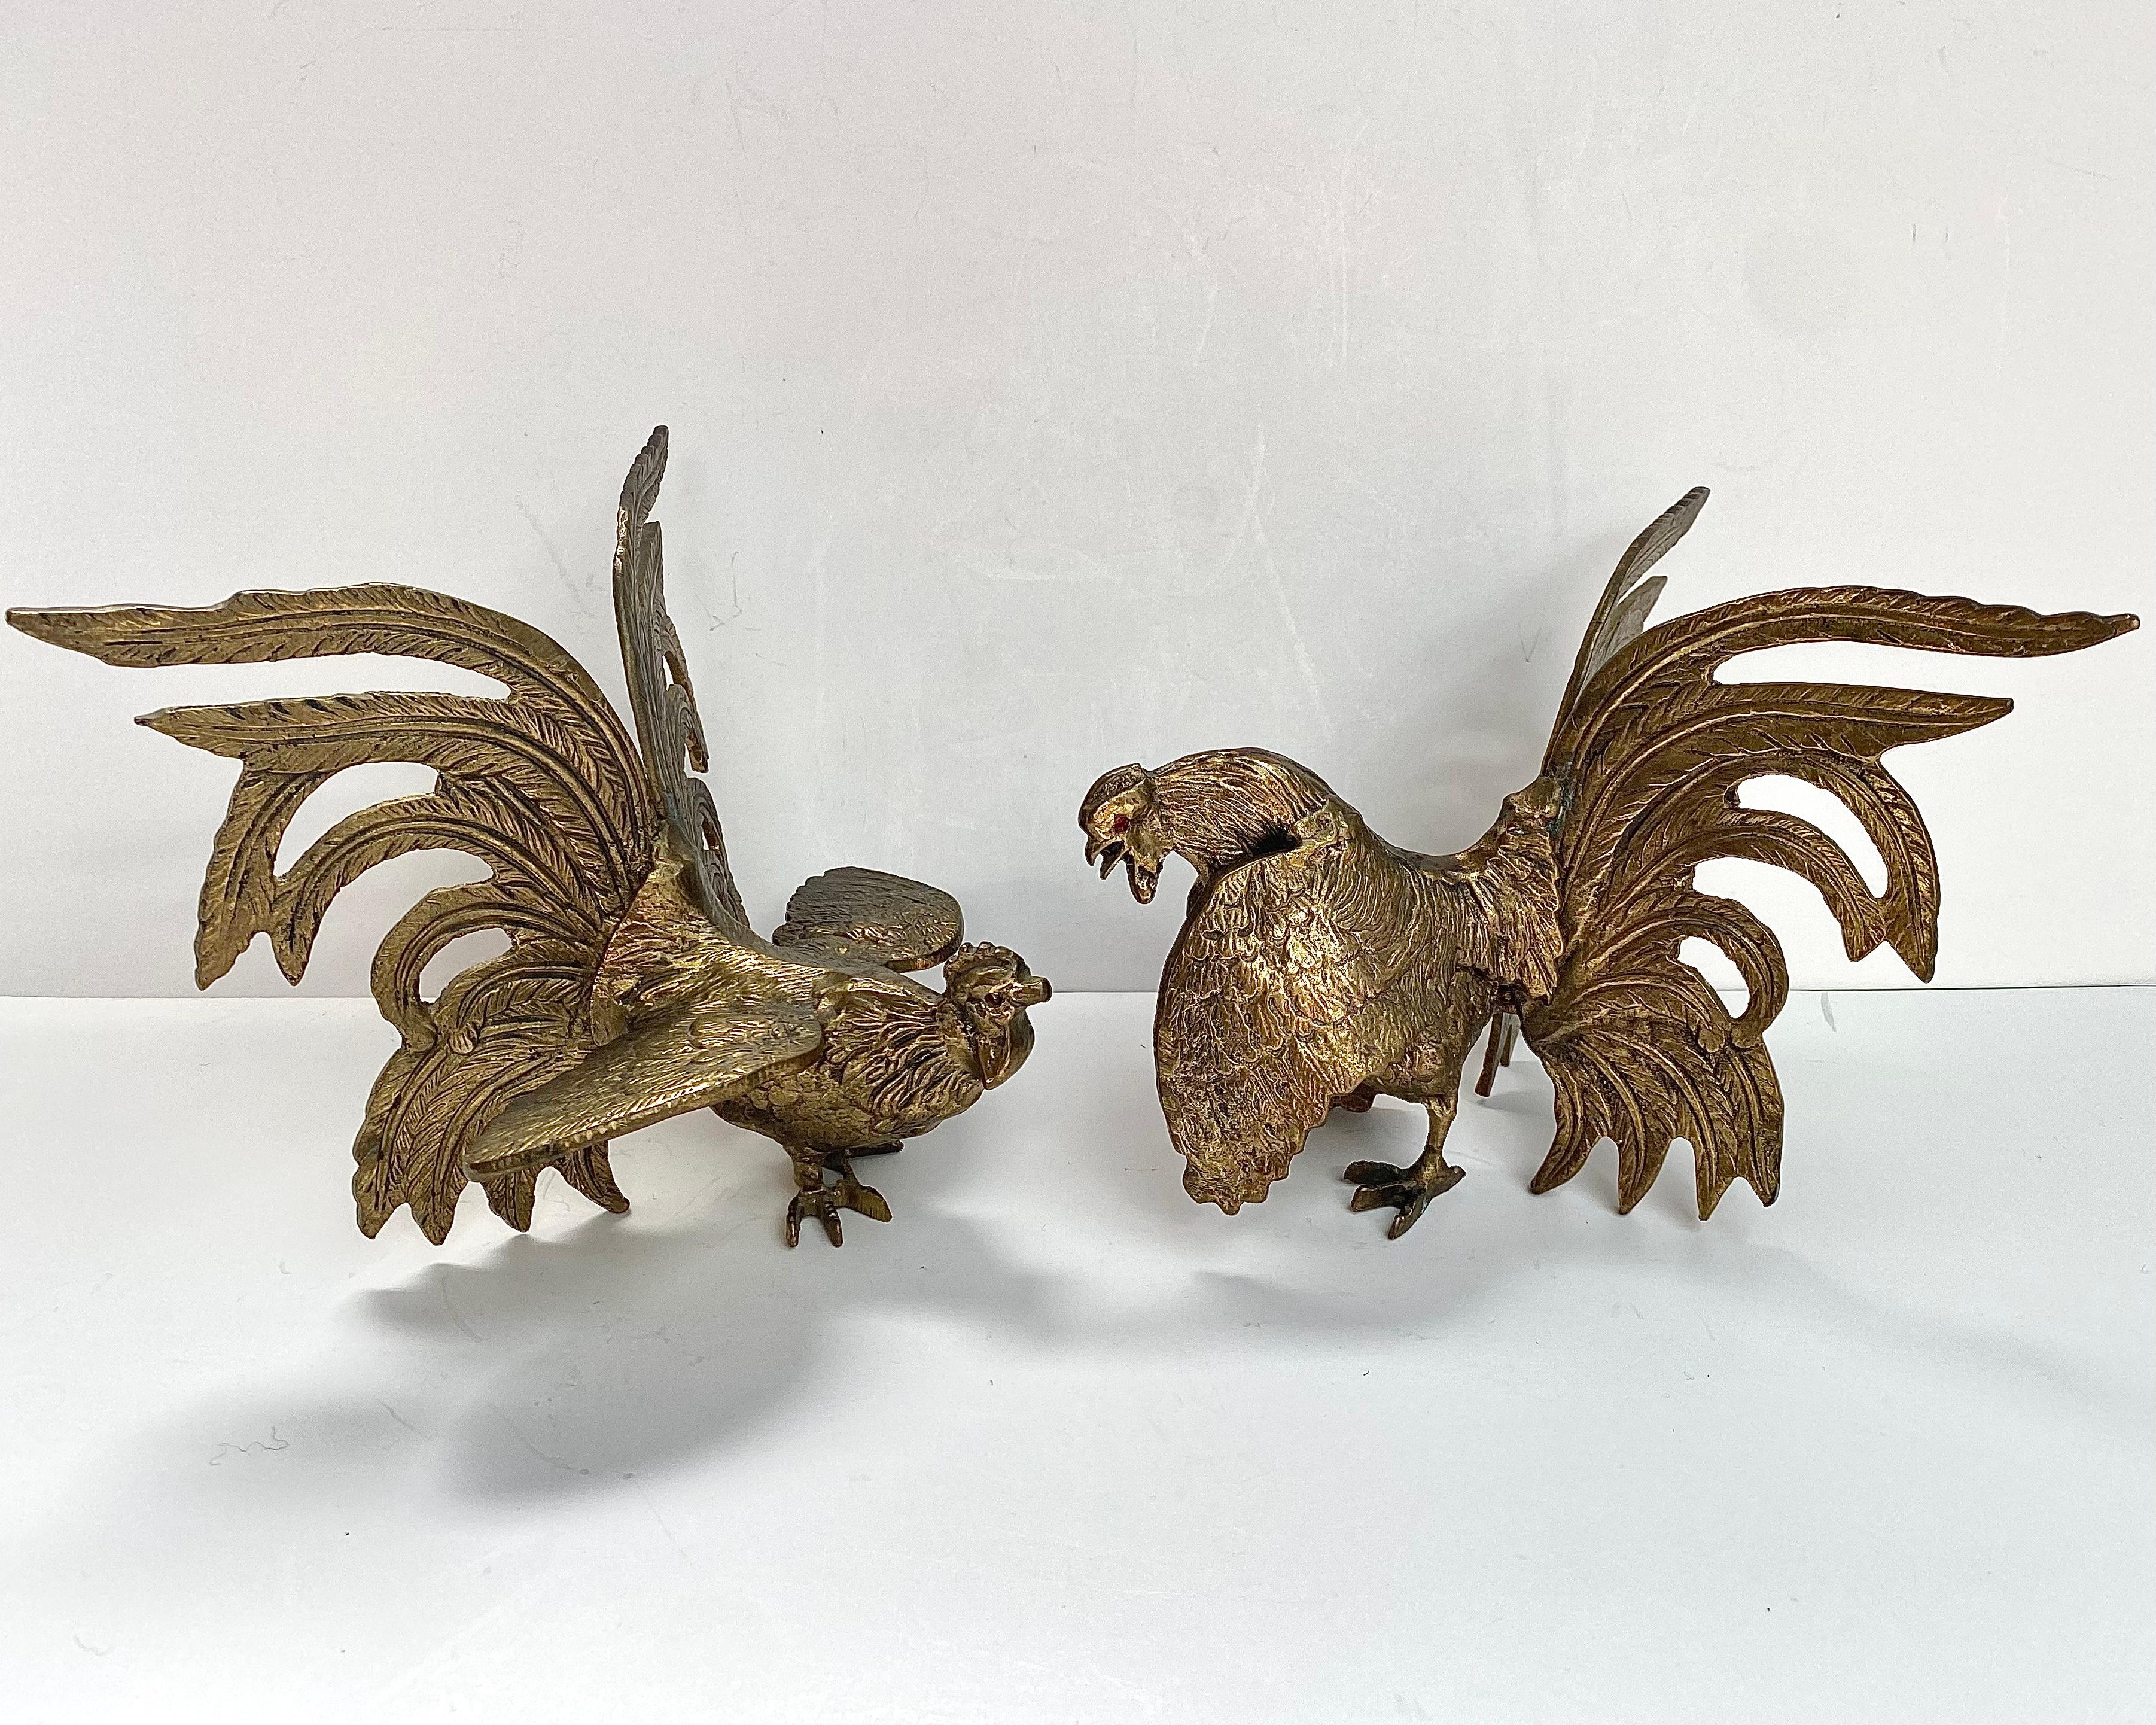 Ornate Bronze Rooster Cock Figurines, “Cock-Fights”, Set 2, France, 1960s.

Highly detailed vintage metal rooster figurines.

Vintage figurines have a classic design and are handmade from natural and sustainable material which is resistant to